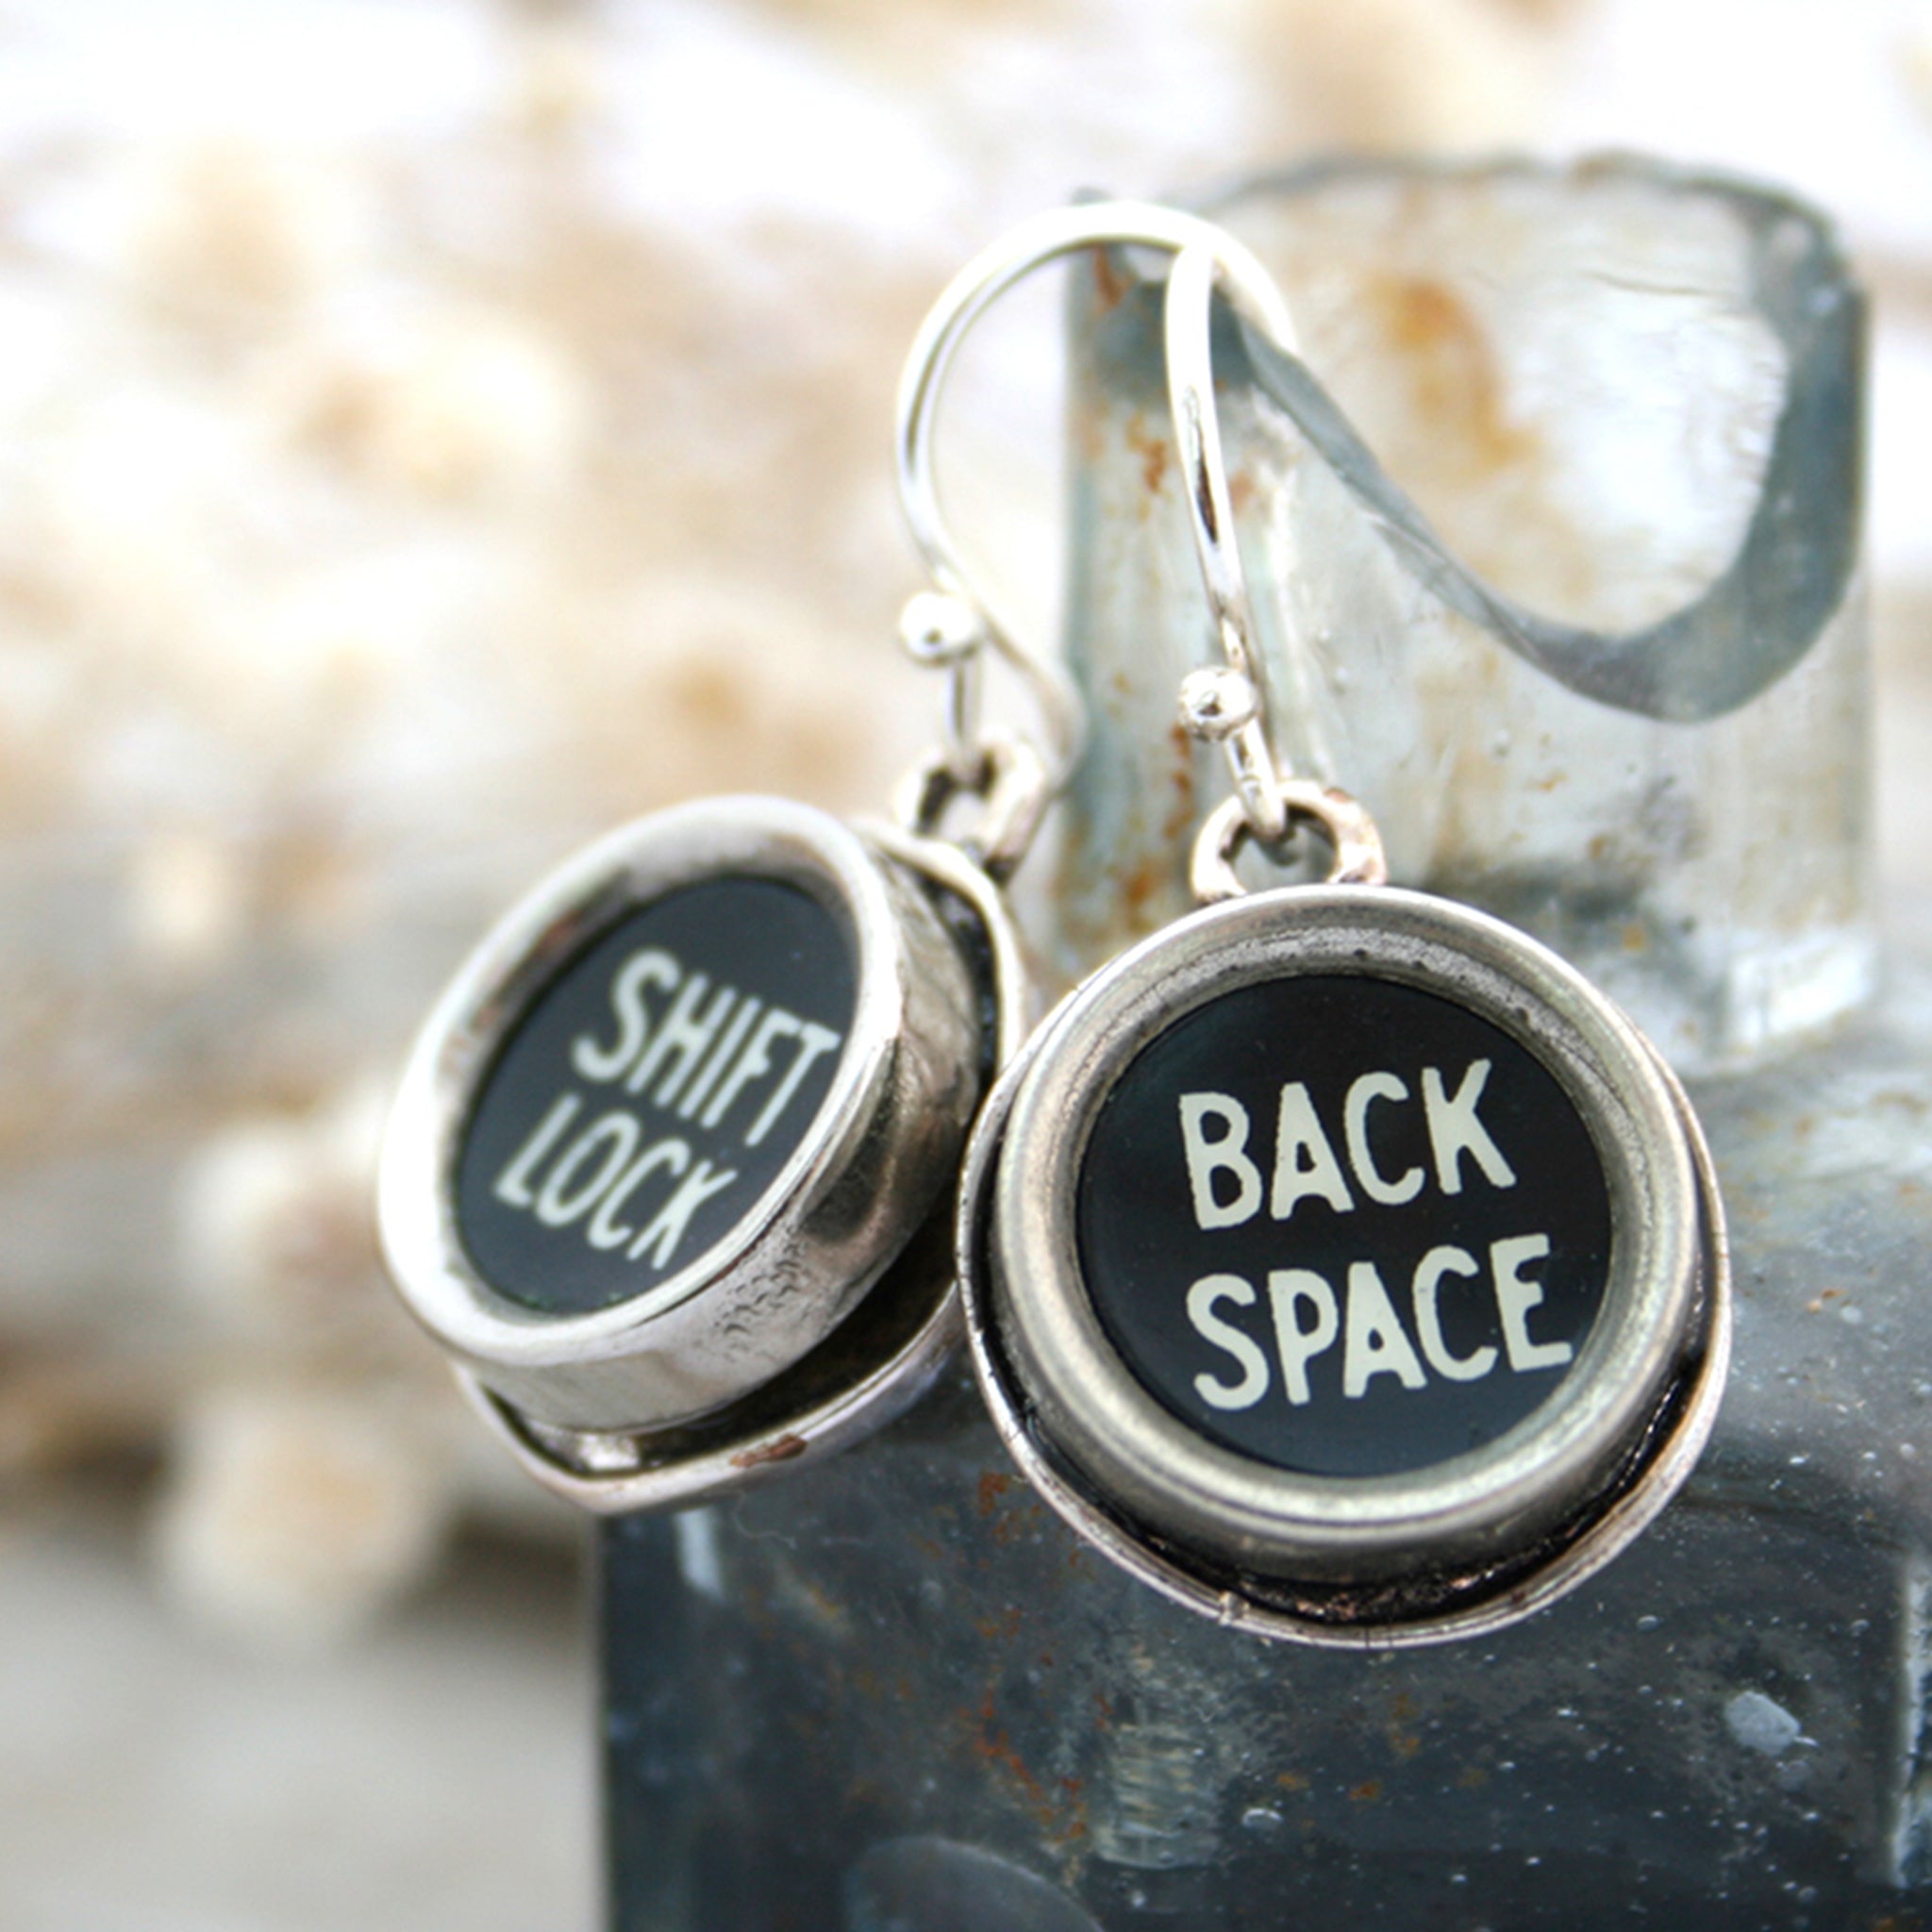 Typewriter keys Shift Lock and Back space earrings hanging from an inkwell